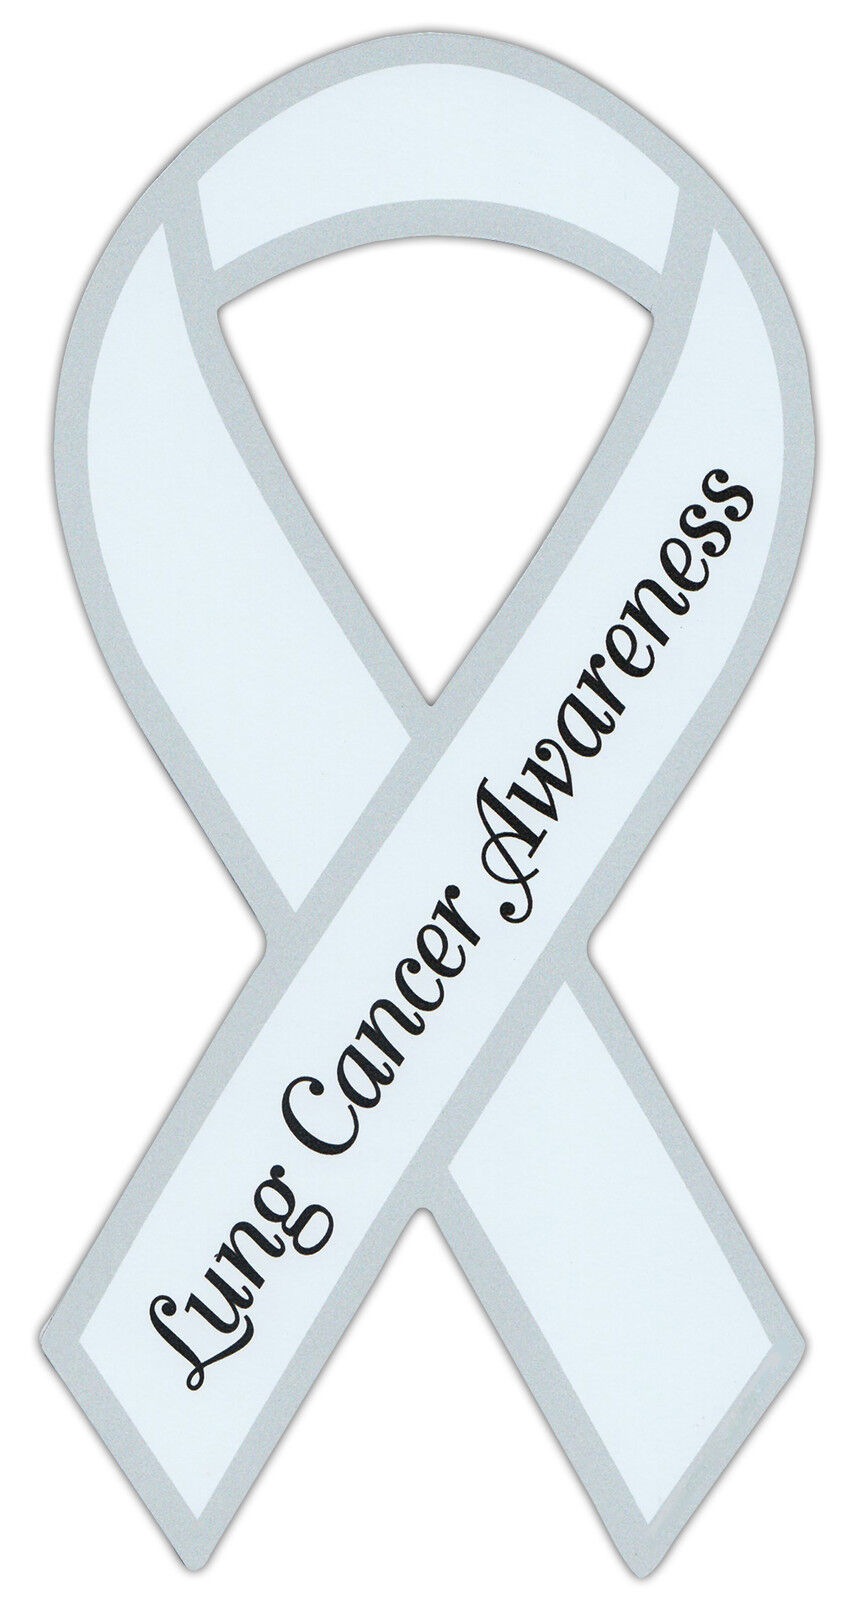 Ribbon Awareness Support Magnet - Lung Cancer - Cars, Trucks, Refrigerator